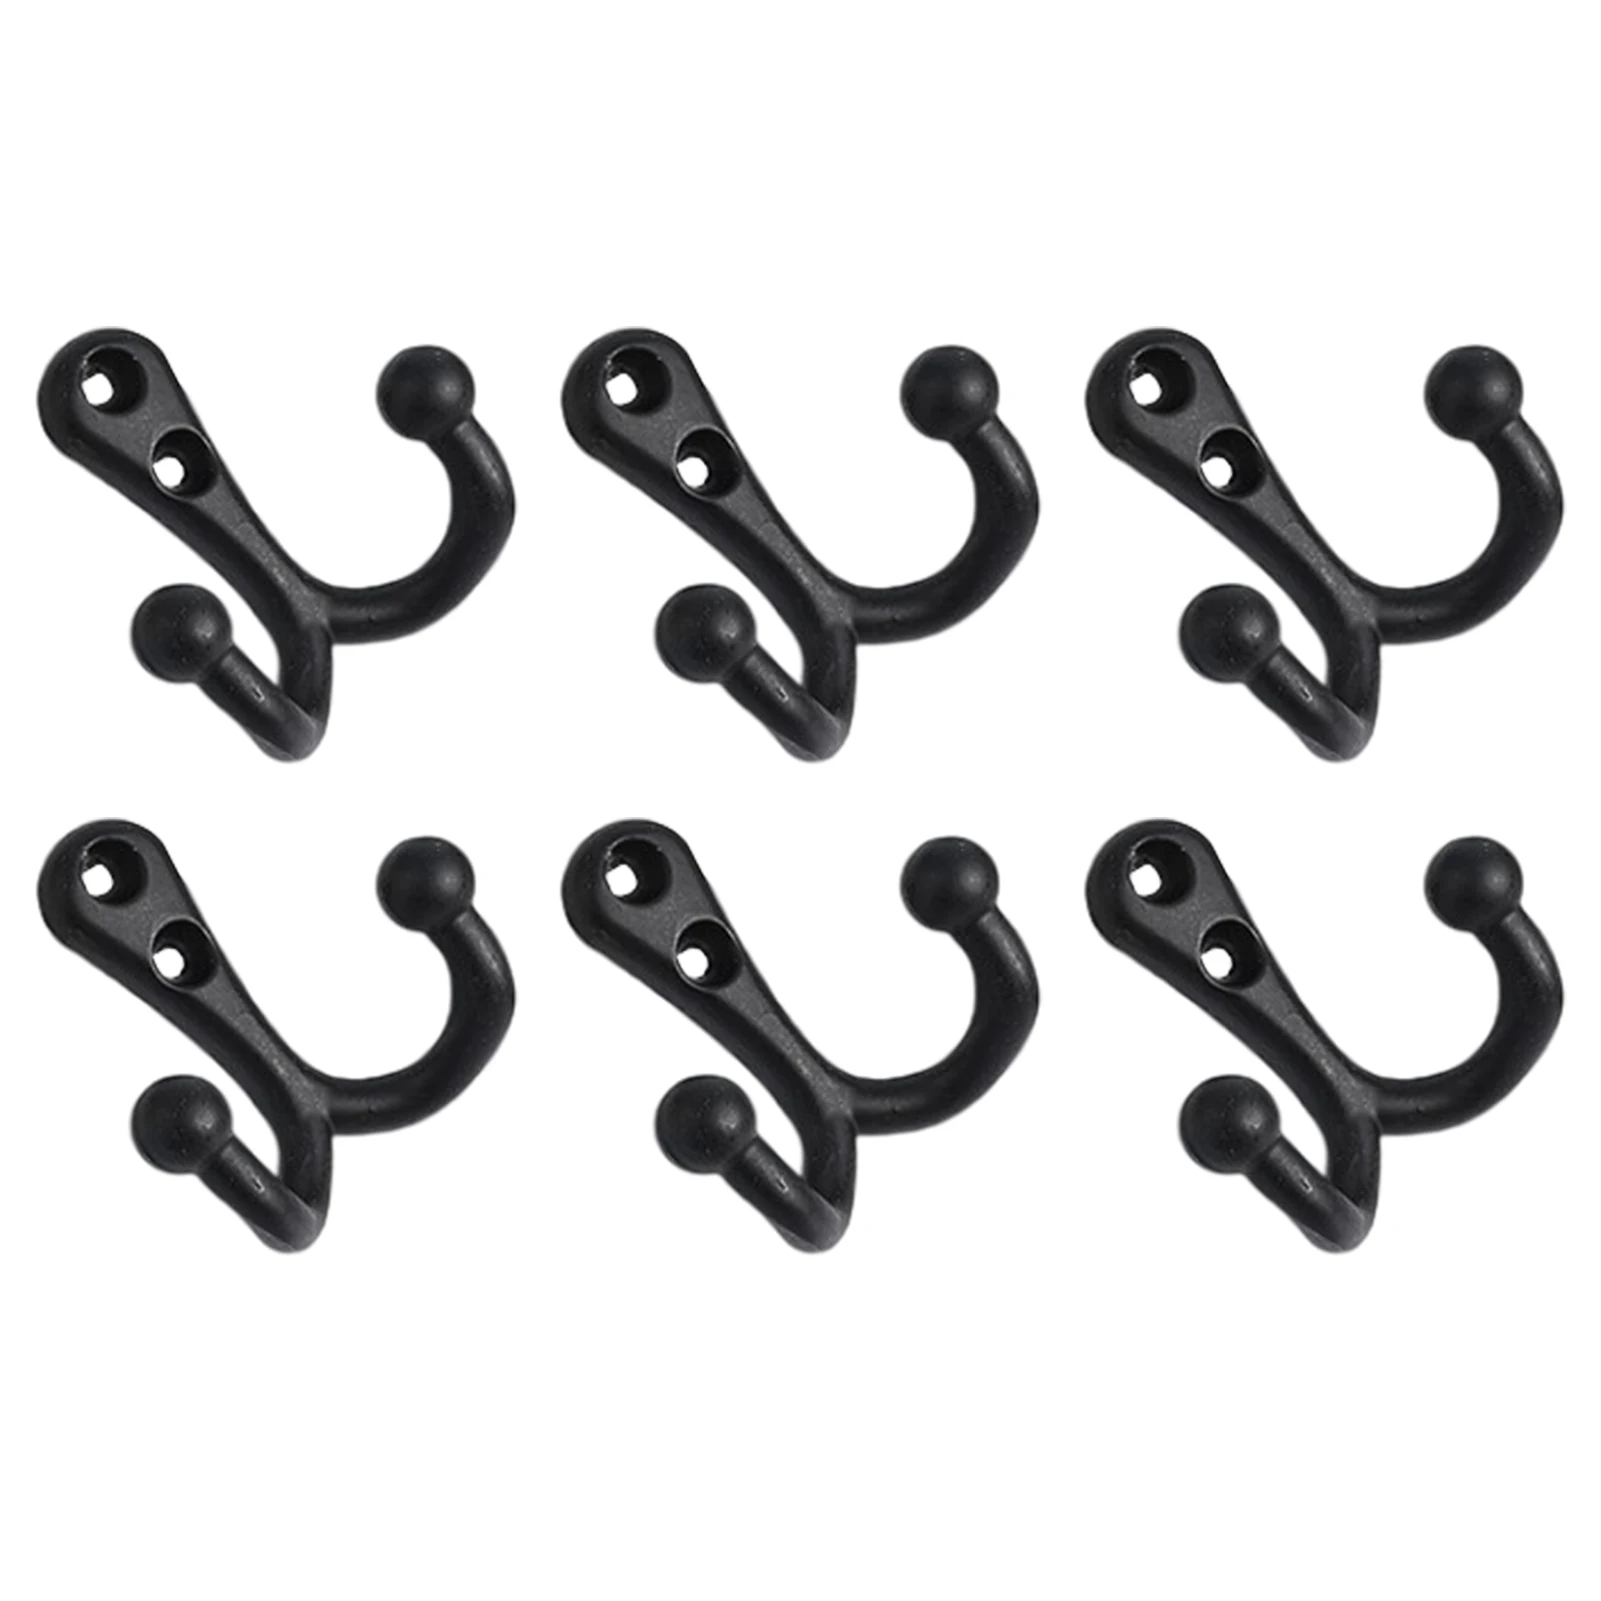 

6 Pieces Double Prong Robe Hooks - Coat Hooks Wall Mounted Durable Heavy Duty Towel Hanger Decorative Vintage Hangers For Sca